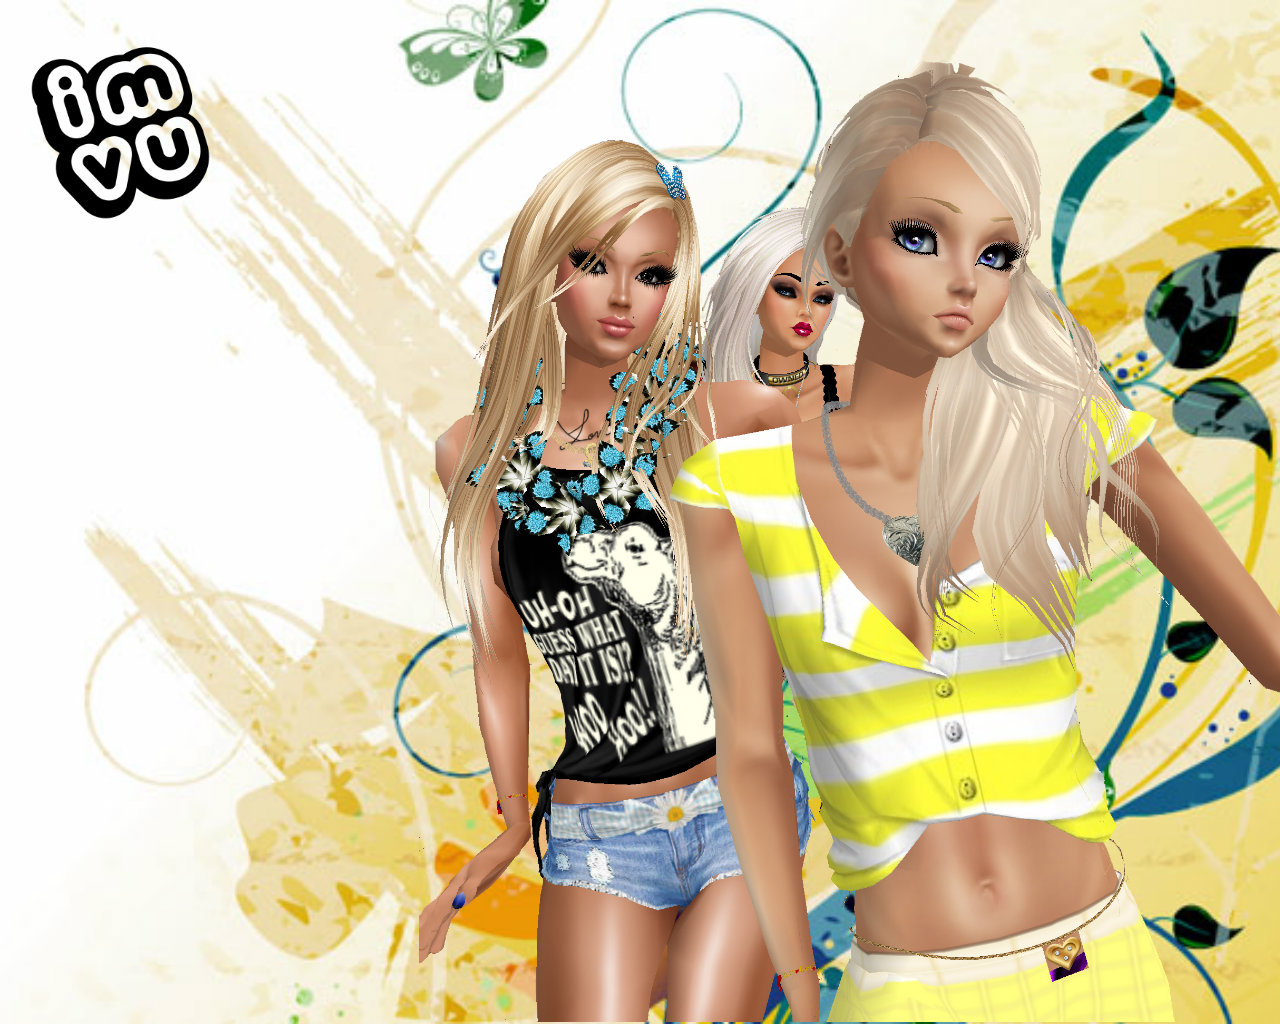 Have you been searching for IMVU desktop wallpapers? 